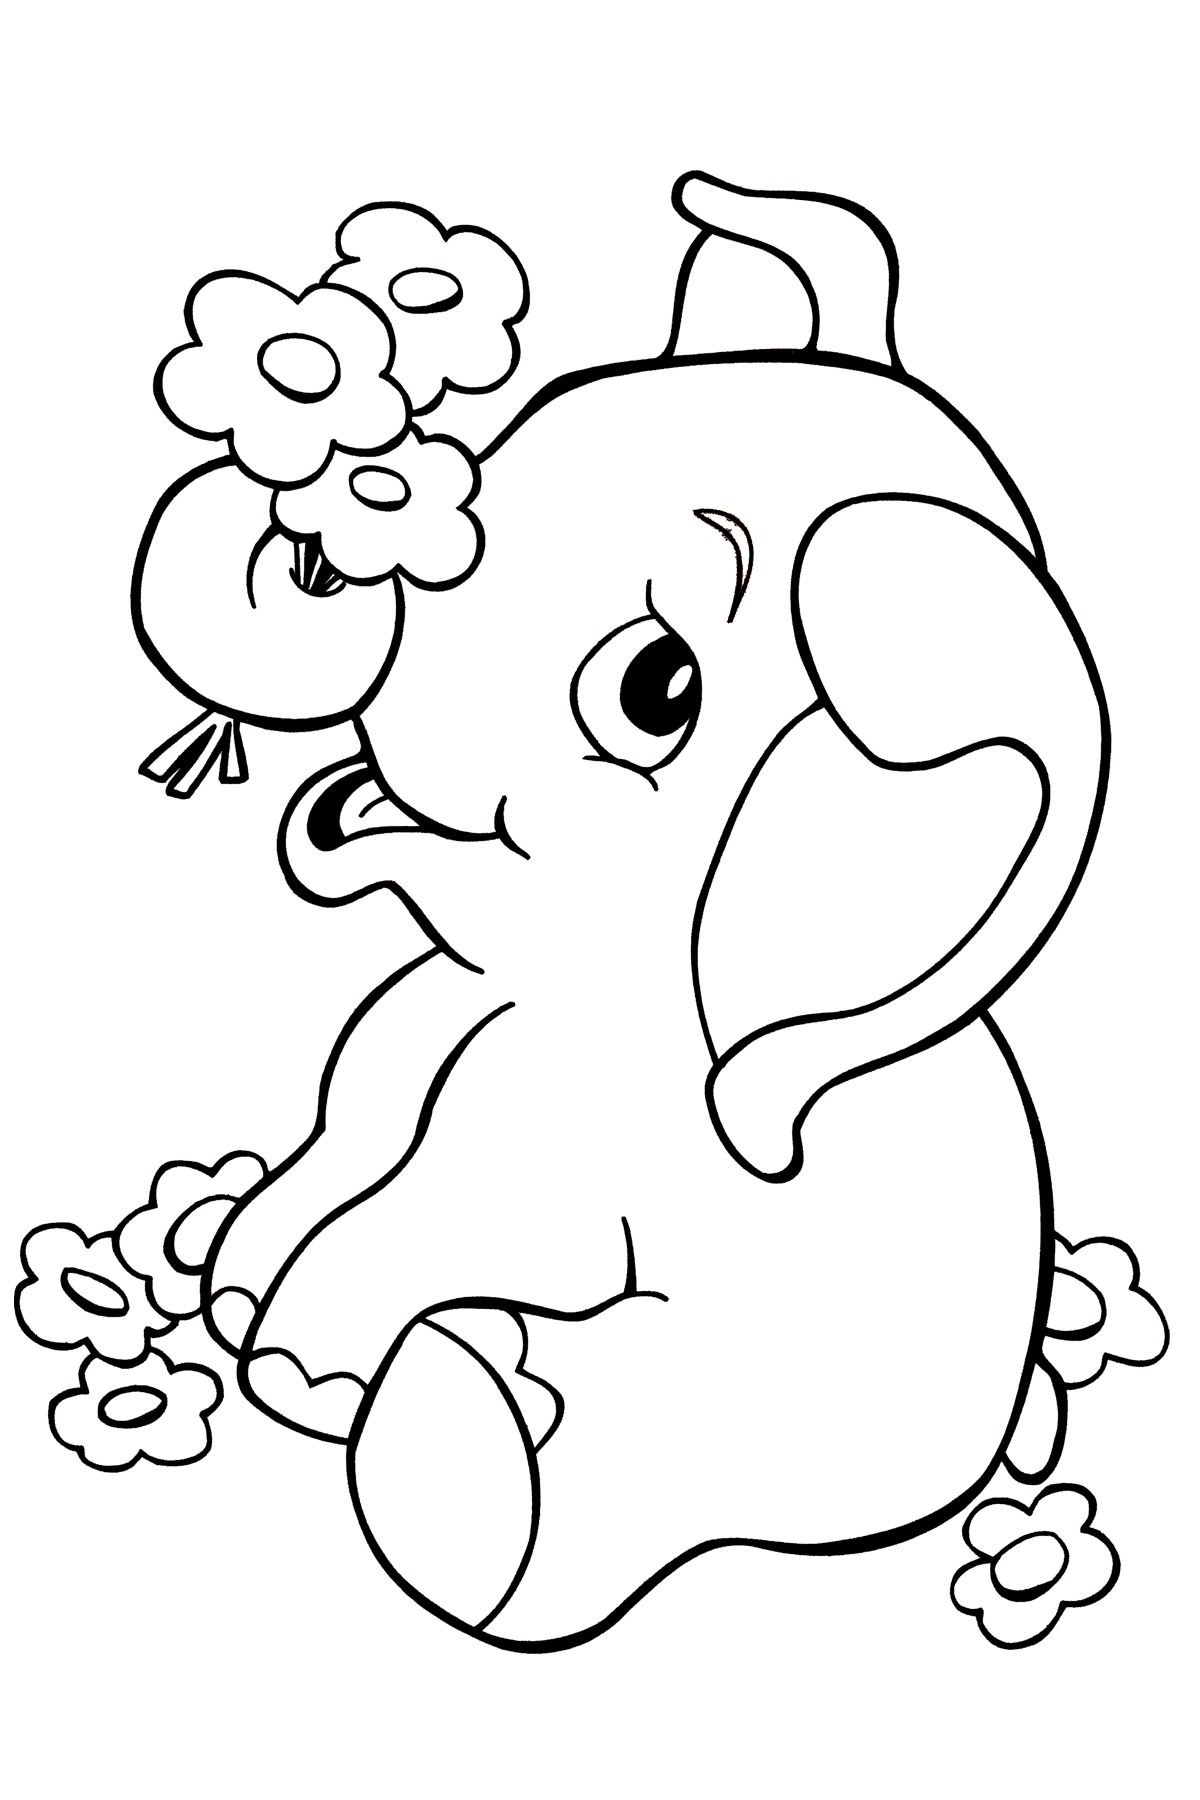 Baby elephant | Elephant coloring page, Jungle coloring ...